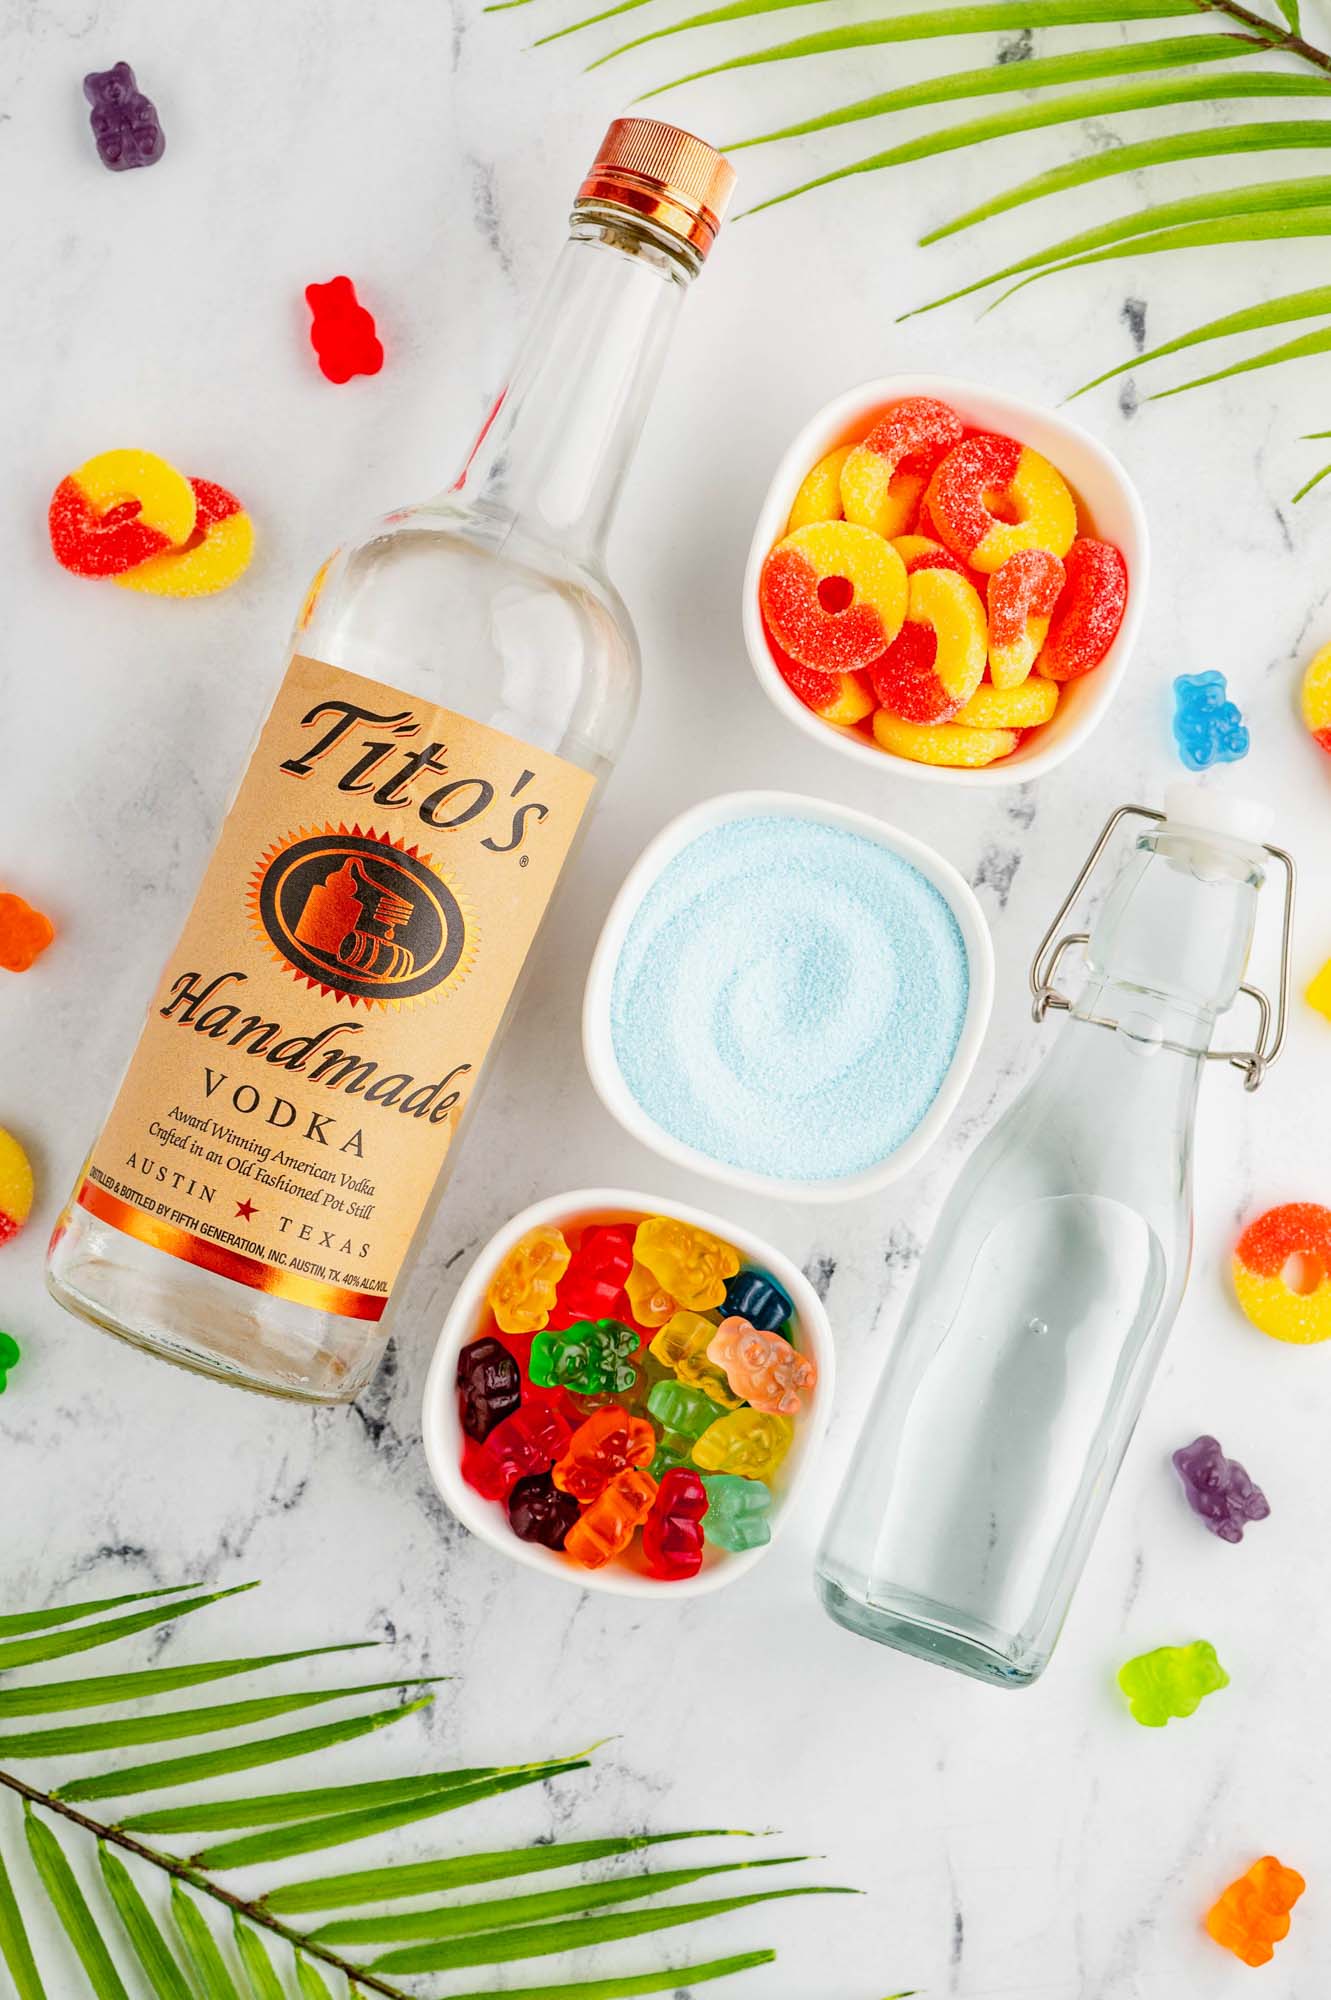 The ingredients you need to make vodka blue jello shots with gummy bears